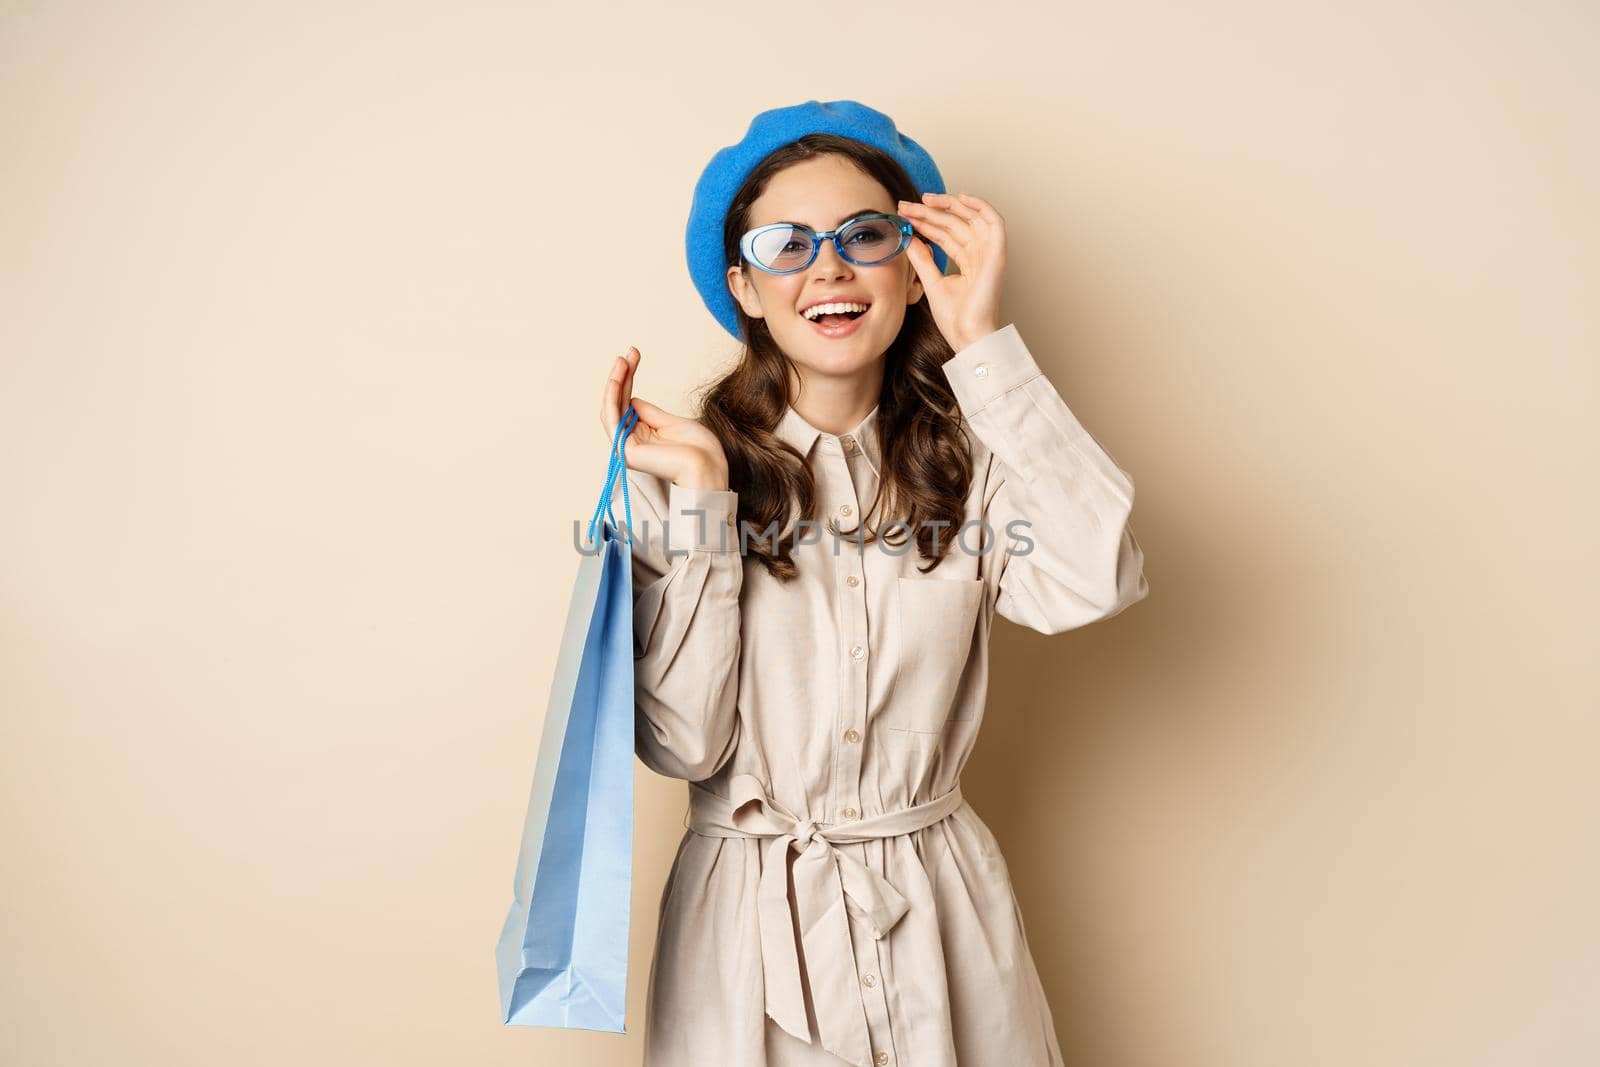 Stylish happy girl on shopping. Portrait of modern woman with shop bag, laughing and smiling satisfied, buying herself gift, standing over beige background.